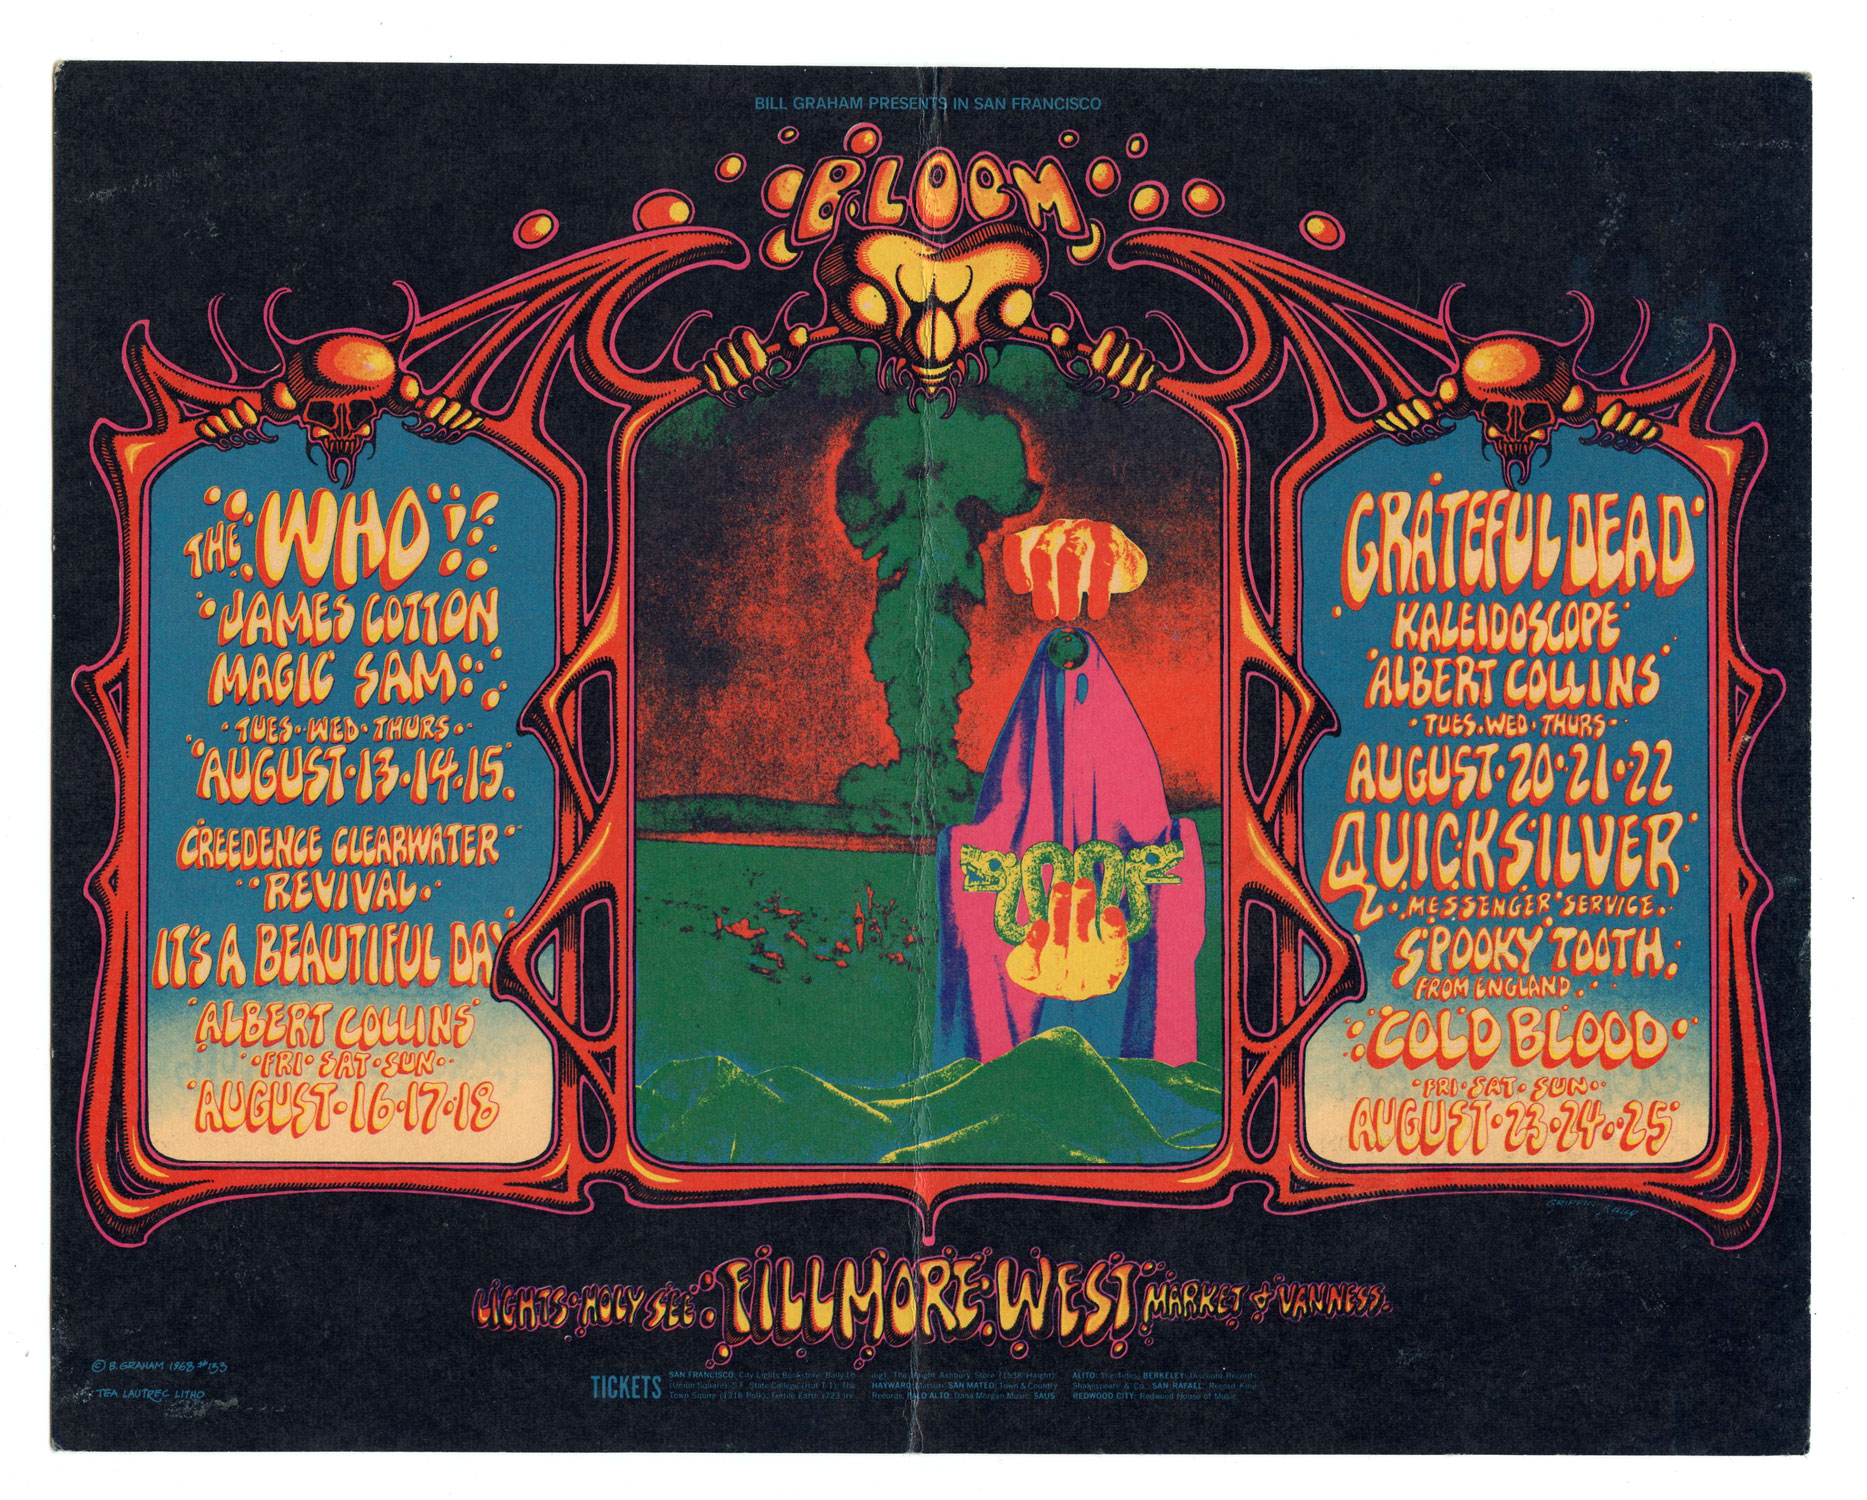 BG 133 Postcard Mailed Grateful Dead Creedence Clearwater Revival 1968 Aug 13